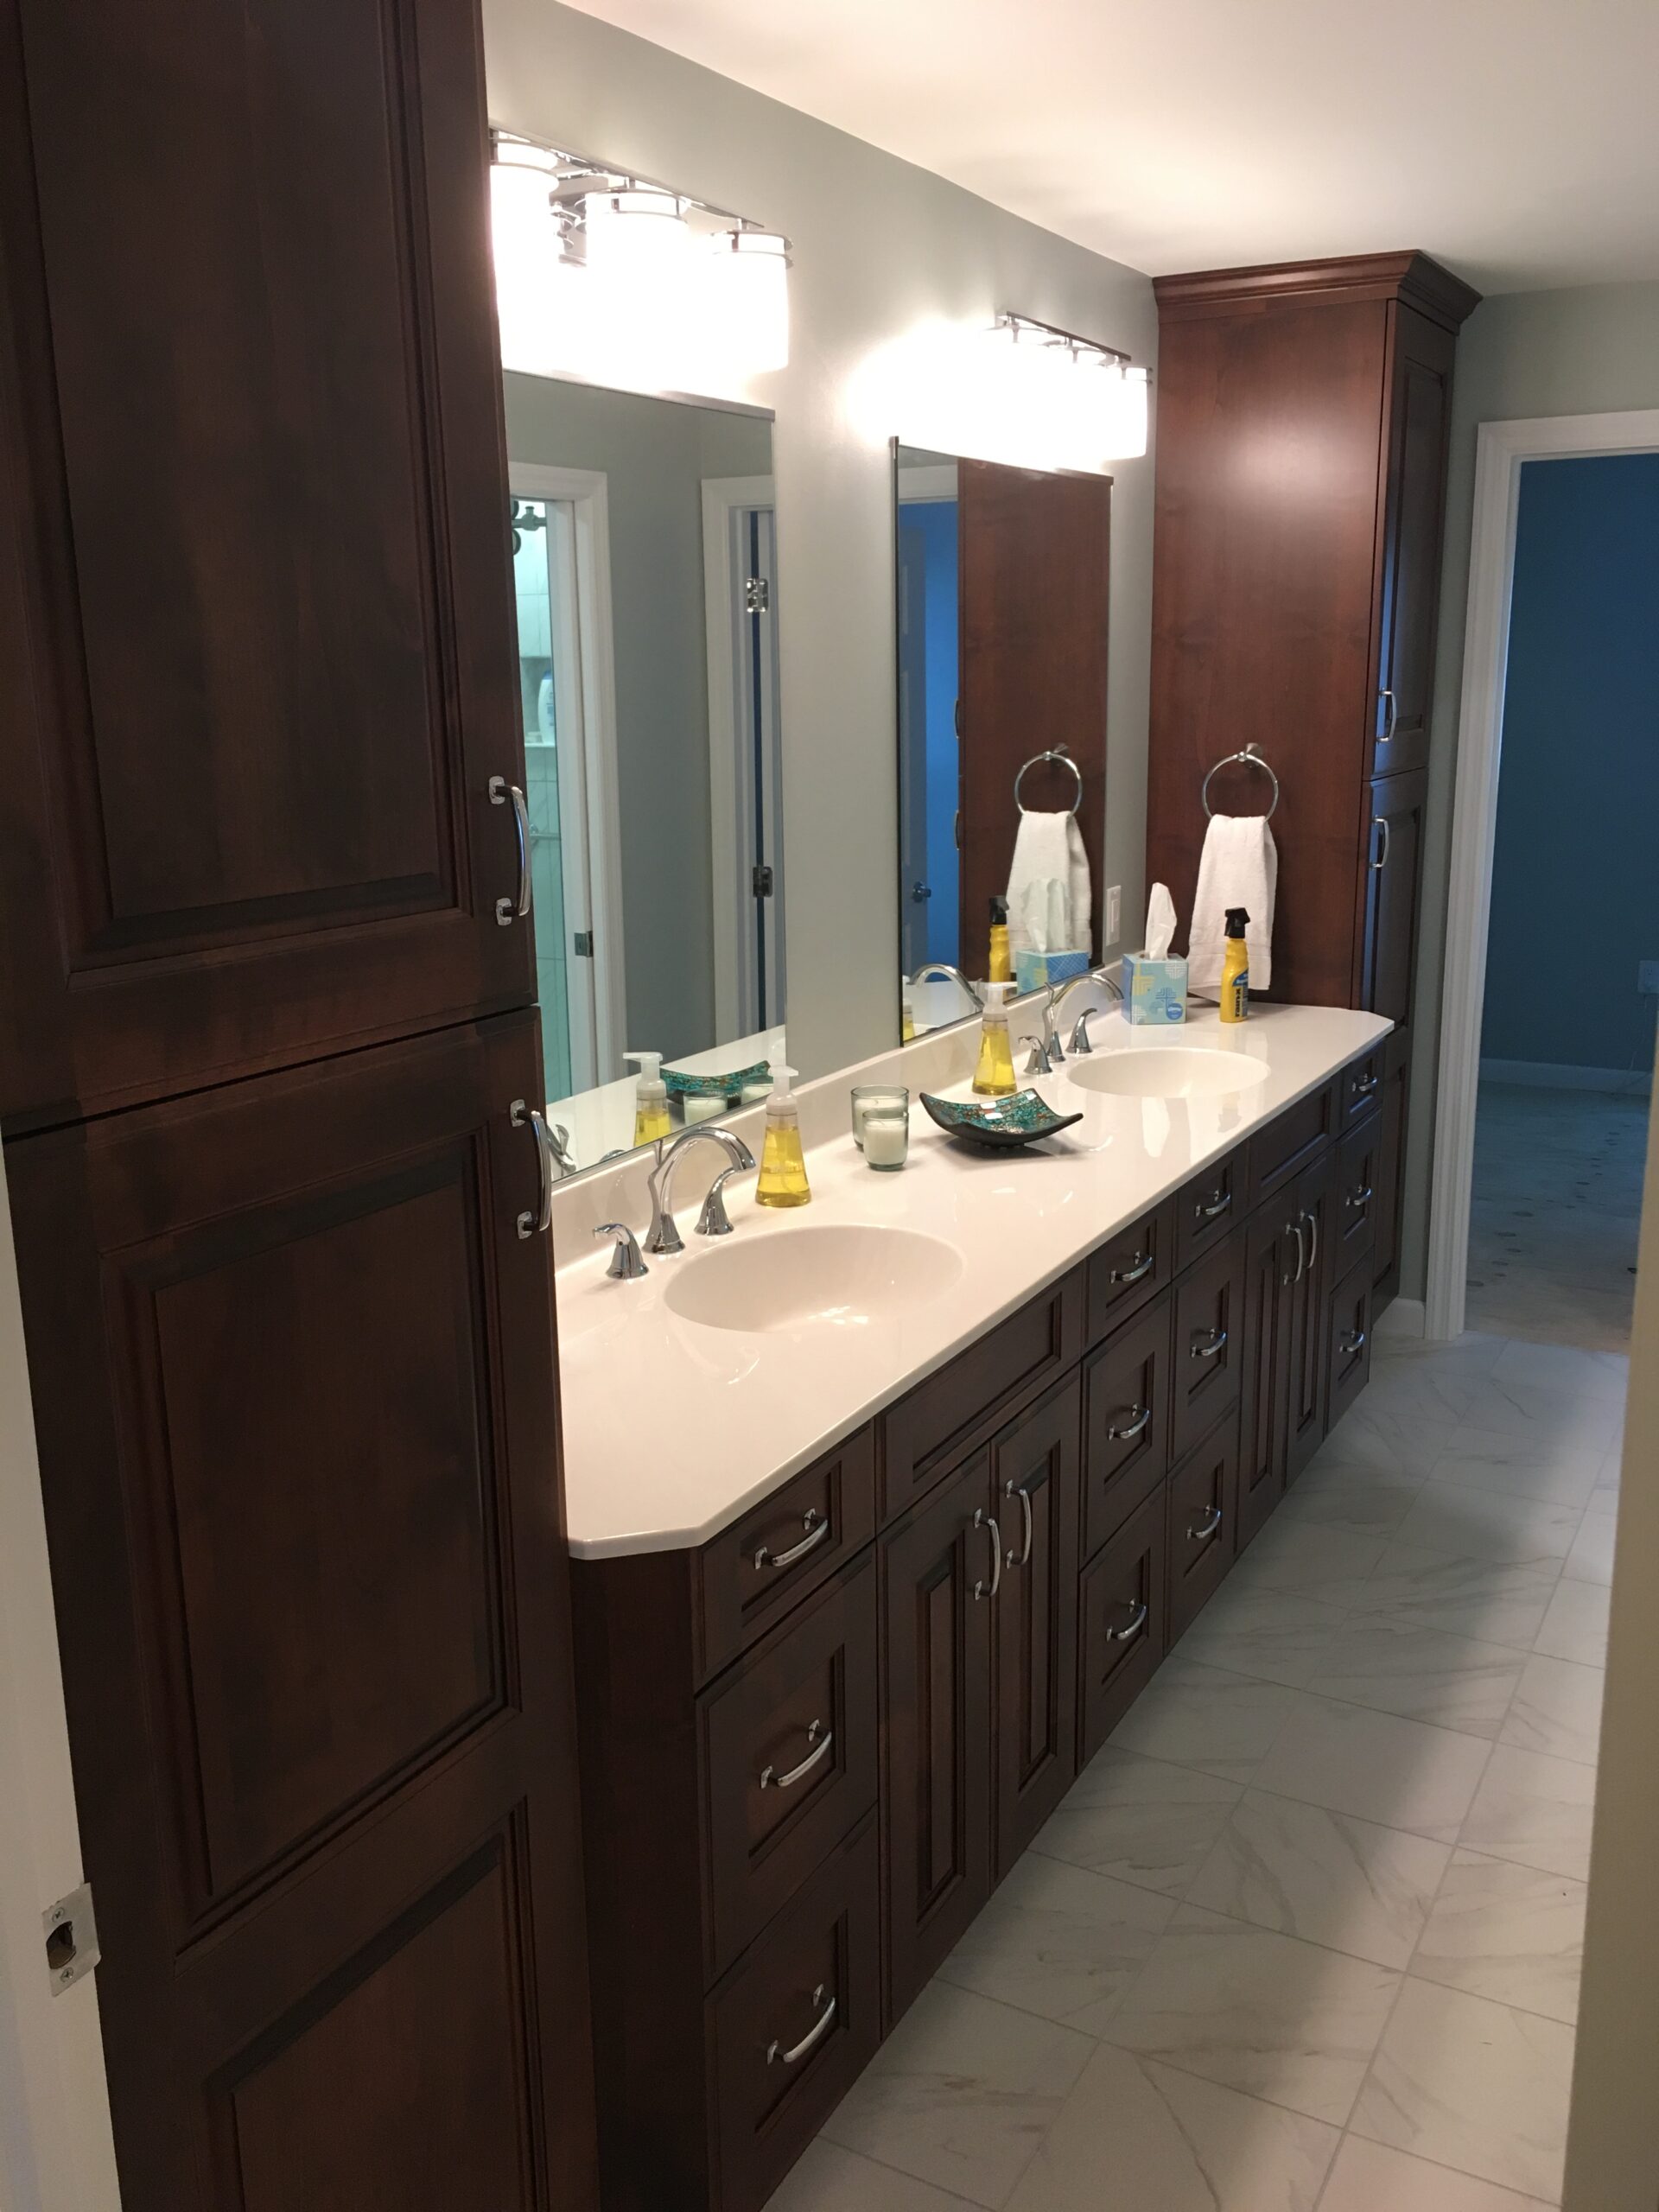 Classic bathroom, brown double sink, white marble countertop, large cabinet storage